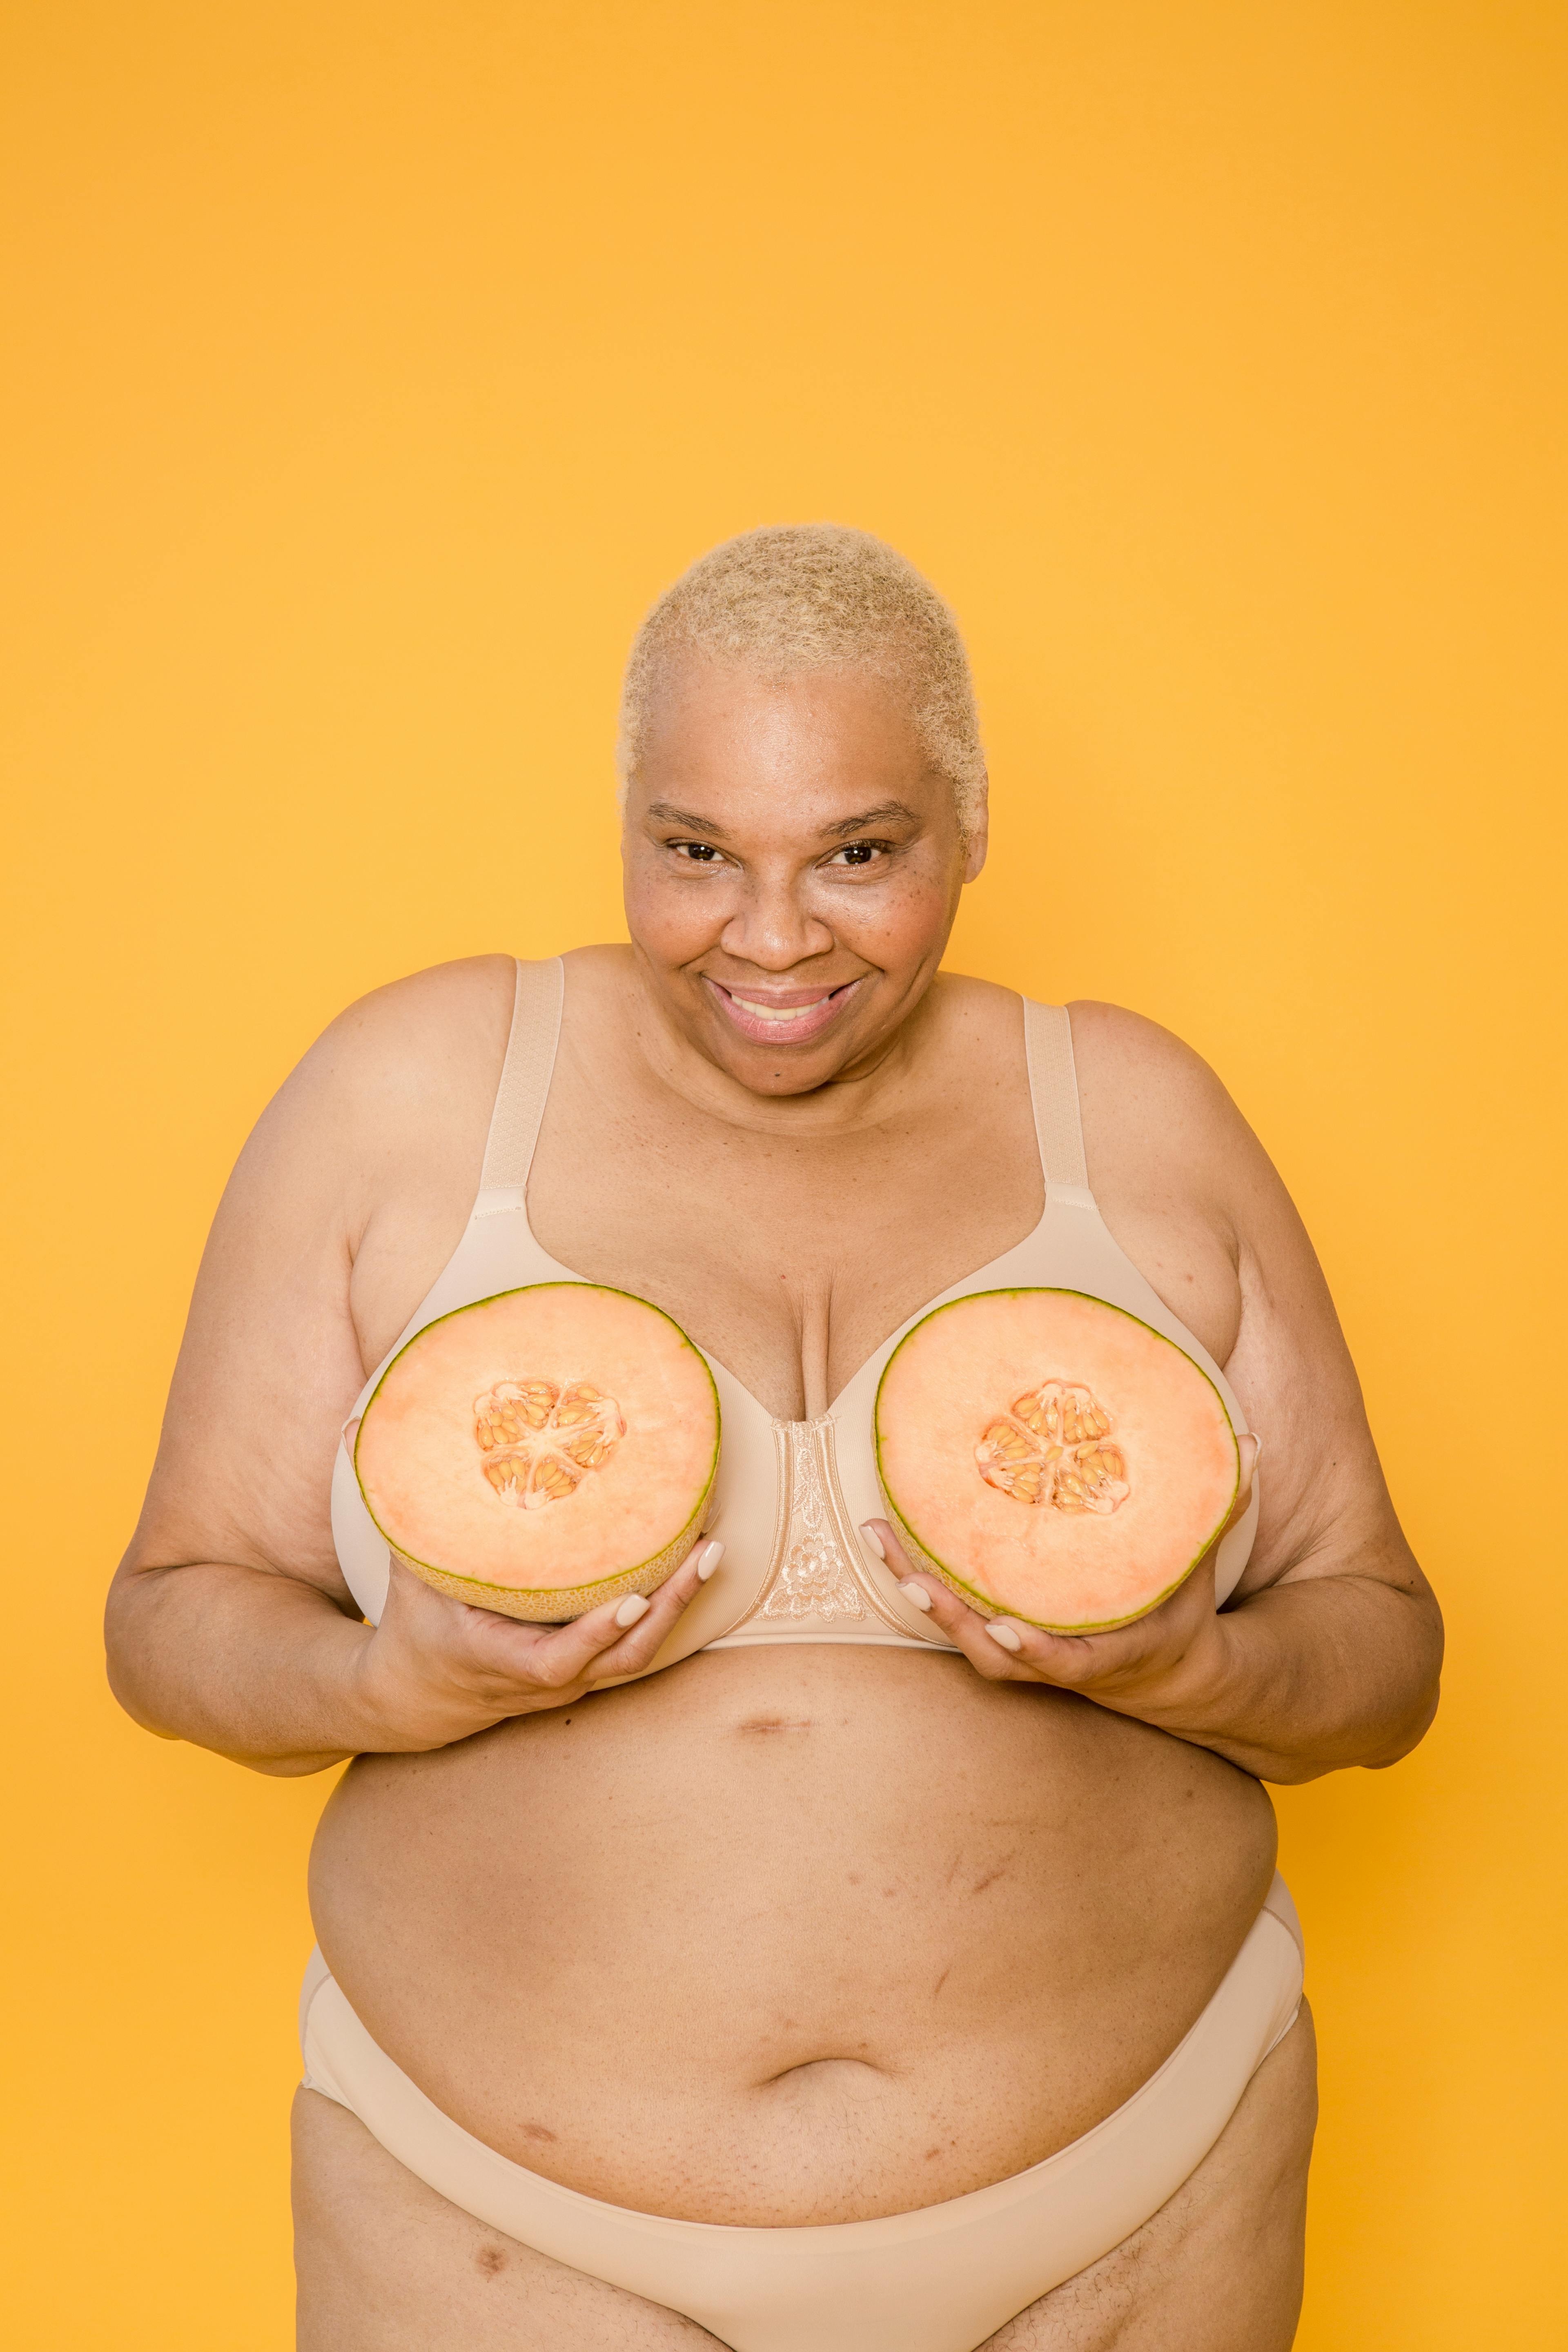 Cheerful overweight ethnic woman in underclothes with cut melon